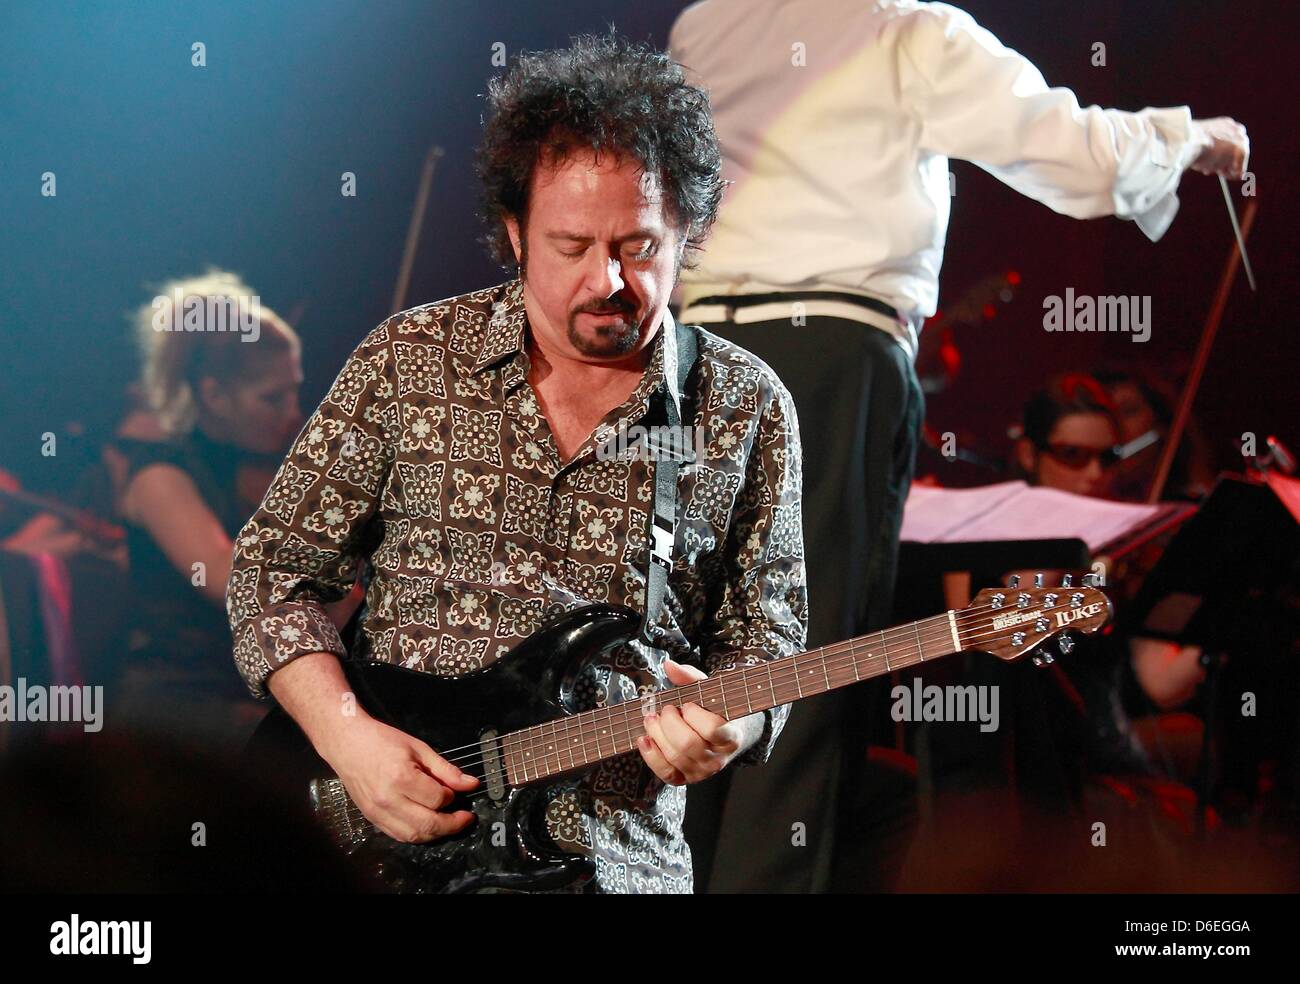 Guitarrist of the US band Toto Steve Lukather performs on stage during the concert 'Rock meets Classic' at the Max-Schmeling-Halle in Berlin, Germany, 17 January 2012. Photo: Lutz Müller-Bohlen Stock Photo